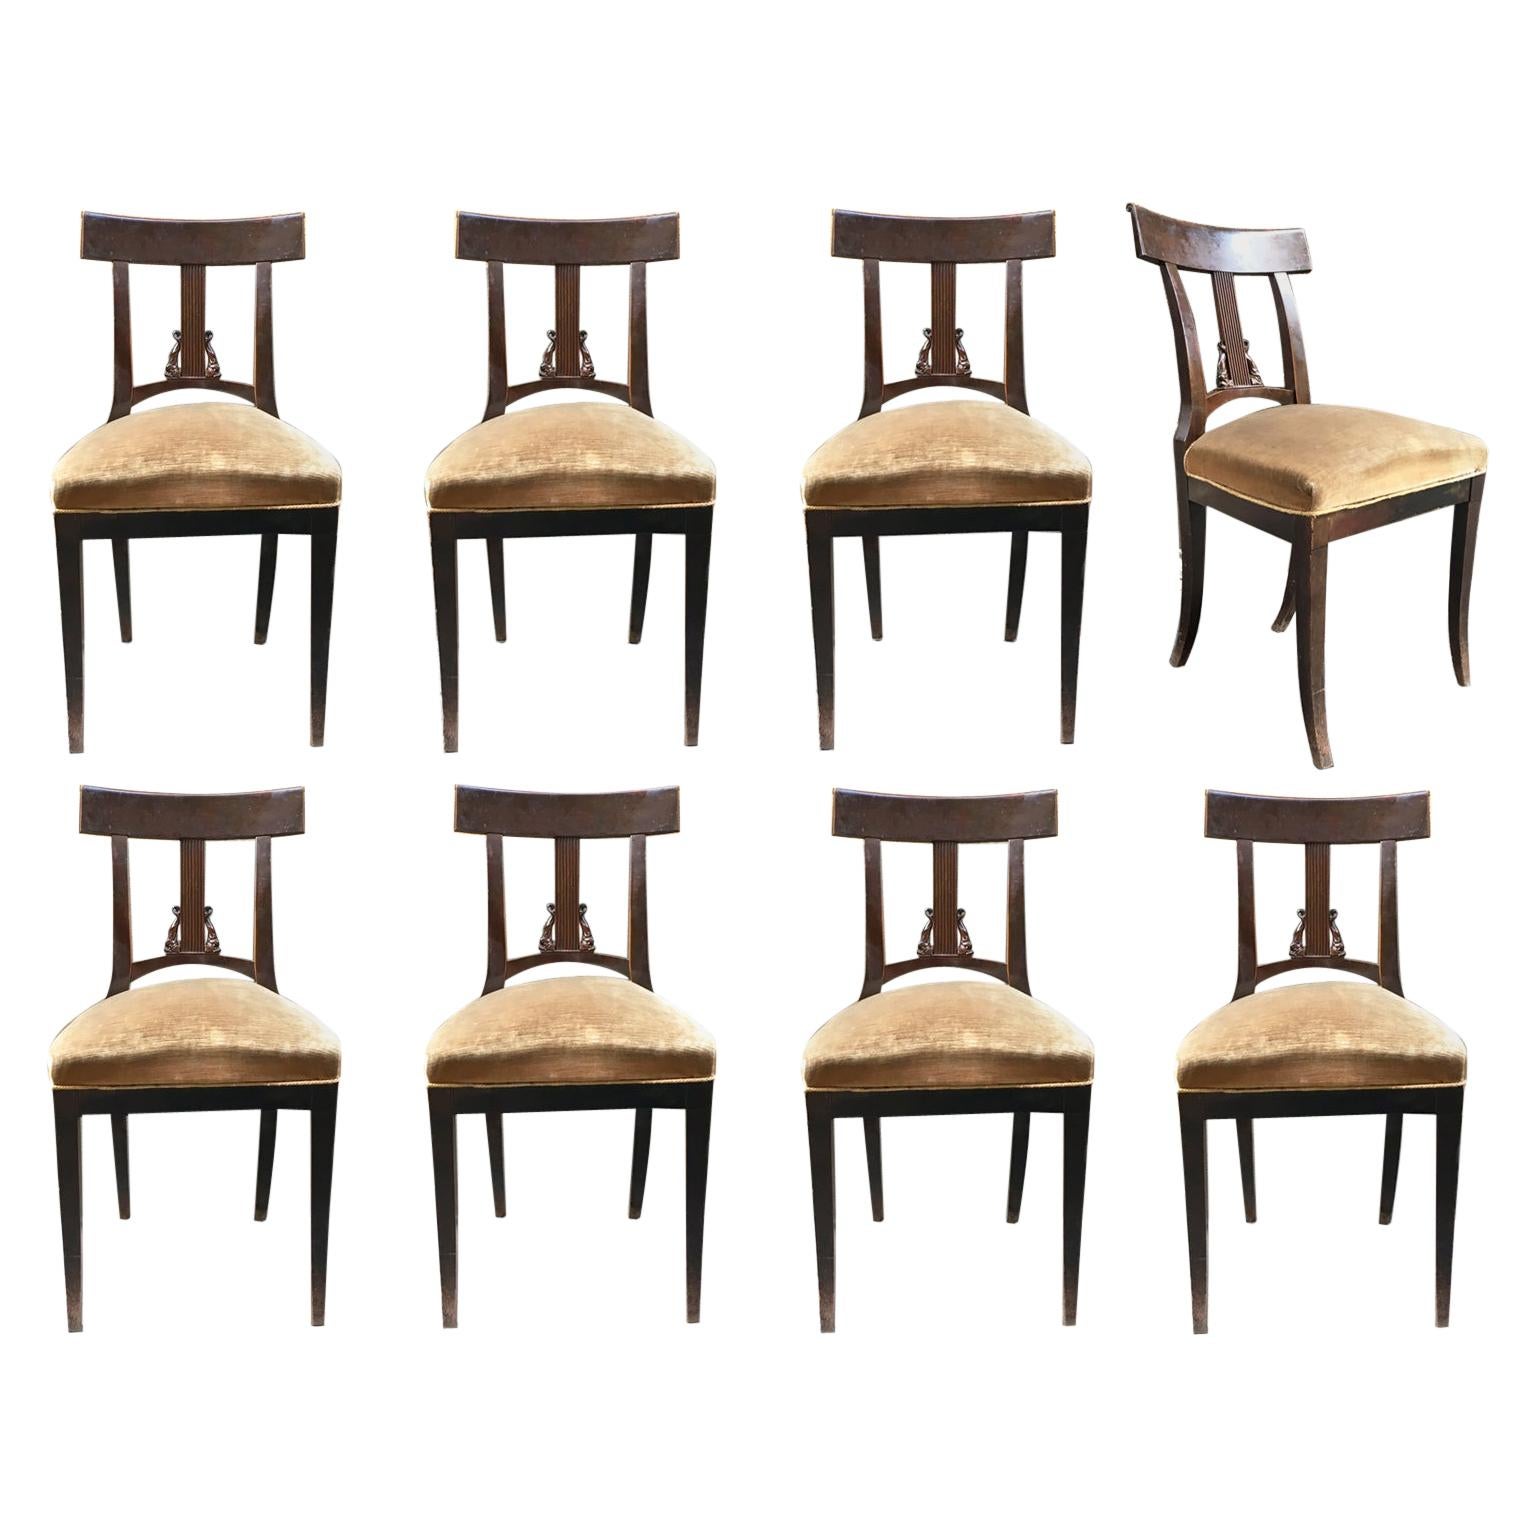 Early 19th Century Set of Eight Italian Empire Chairs in Solid Beecwood